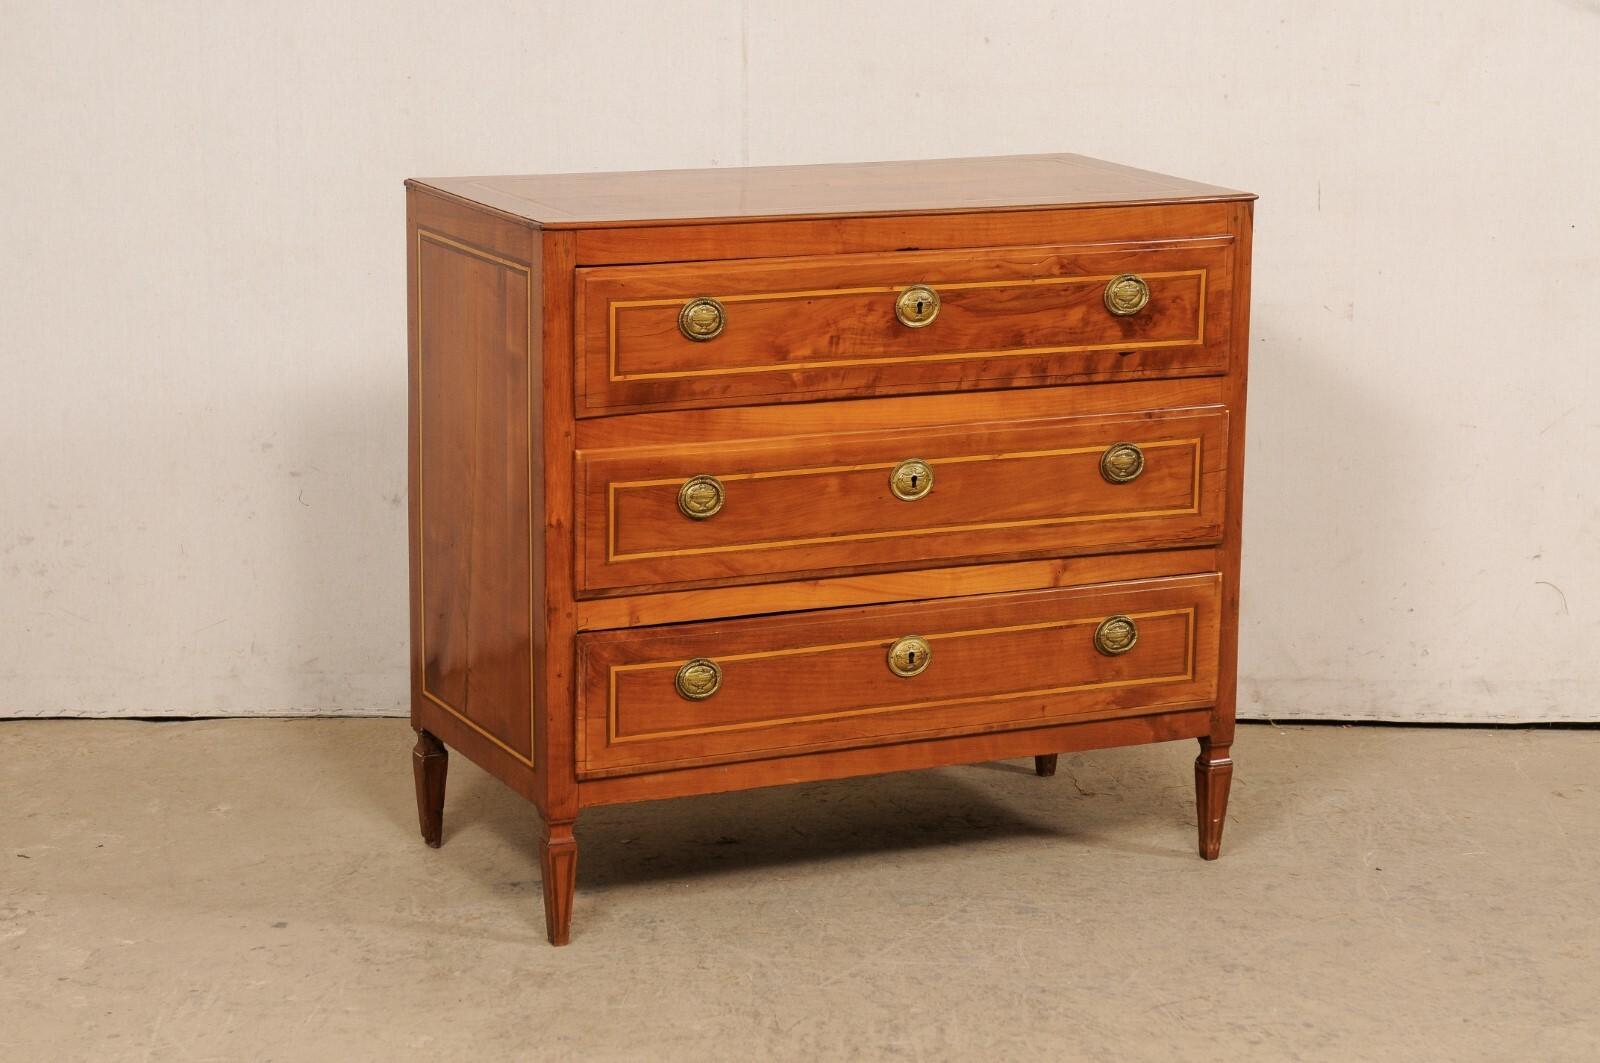 An Italian chest of drawers from the turn of the 18th and 19th century. This antique chest from Italy has been designed in clean/linear lines, and houses three full-sized and graduated drawers, each nicely outlined with a contrast banding inlay and